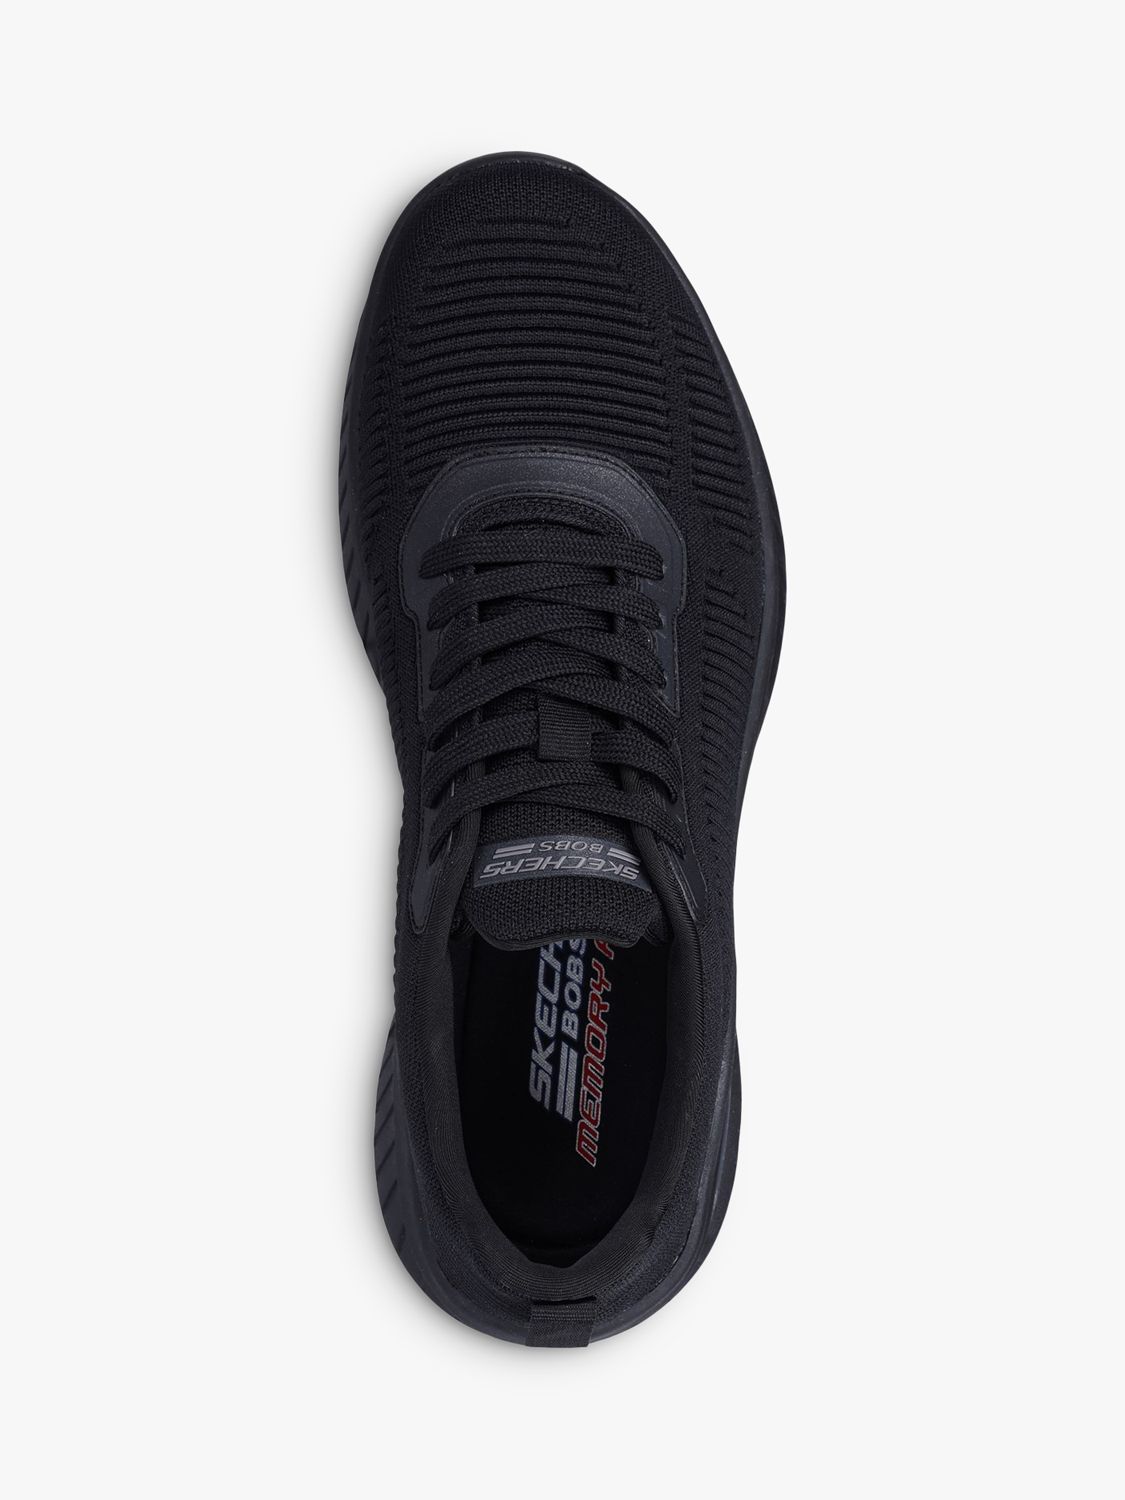 Skechers Squad Air Close Encounter Trainers, Black at John Lewis & Partners